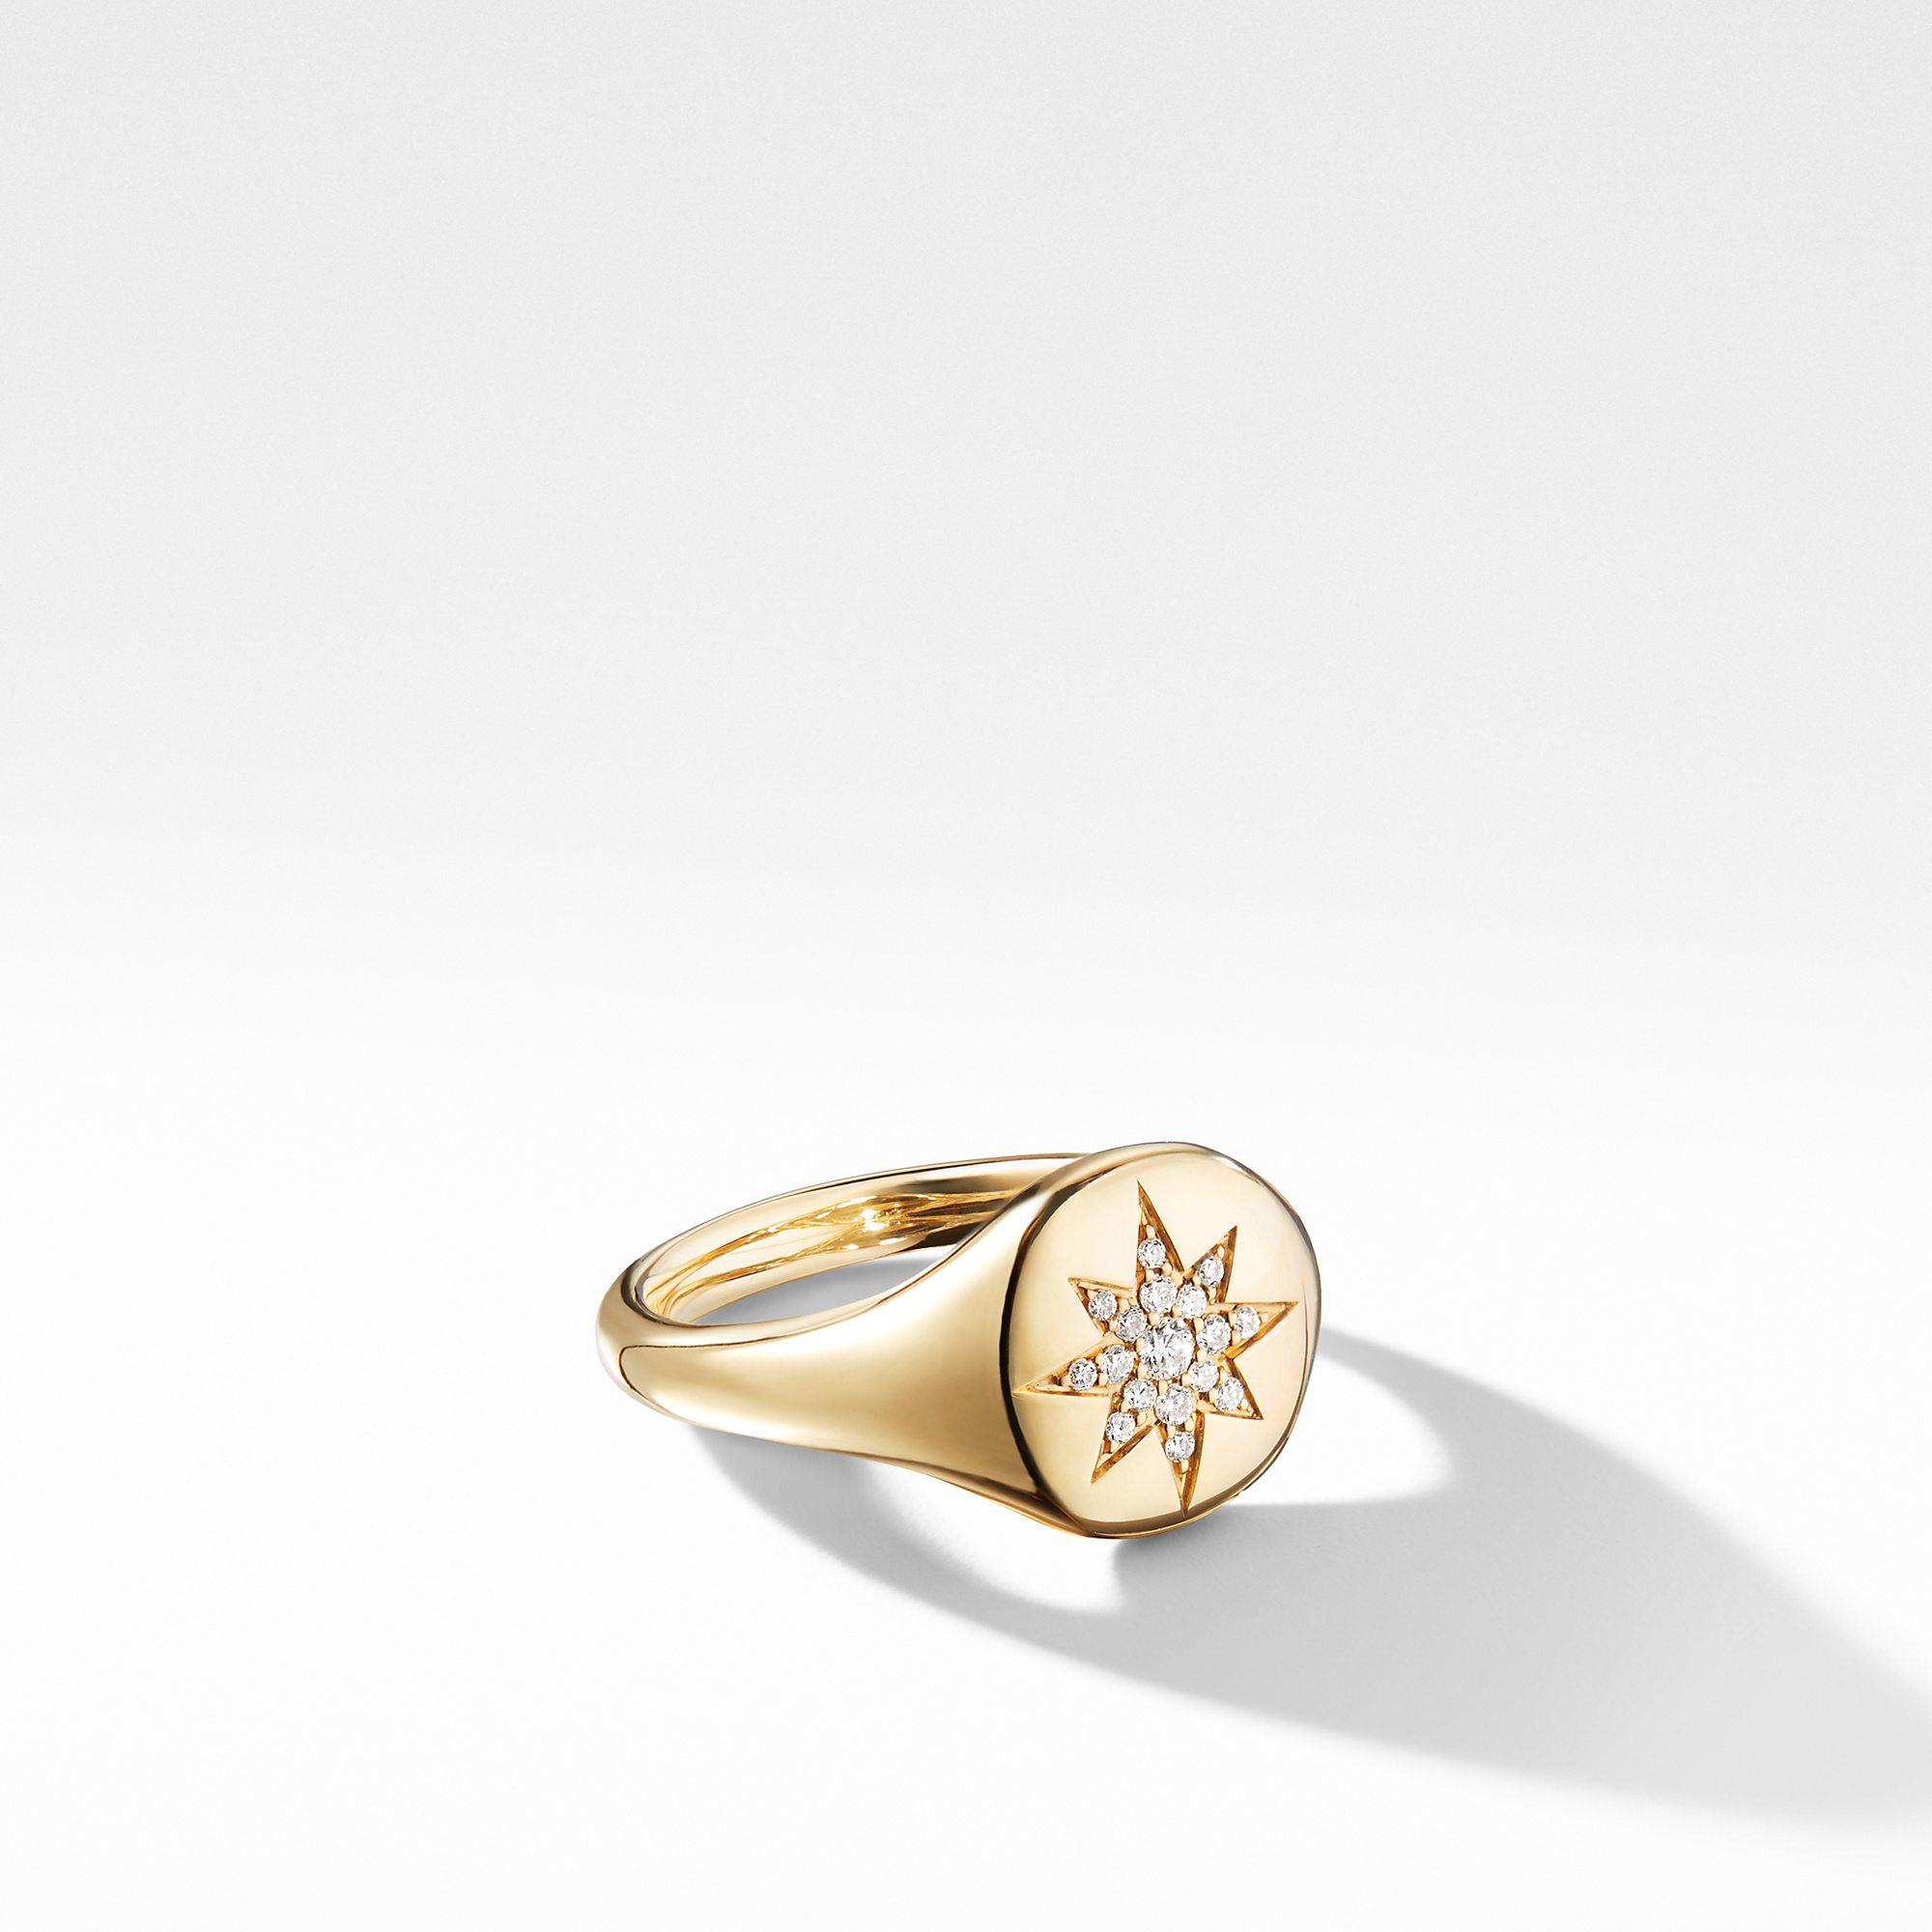 David Yurman Cable Collectibles Compass Mini Pinky Ring in 18k Gold with Diamonds, size 4